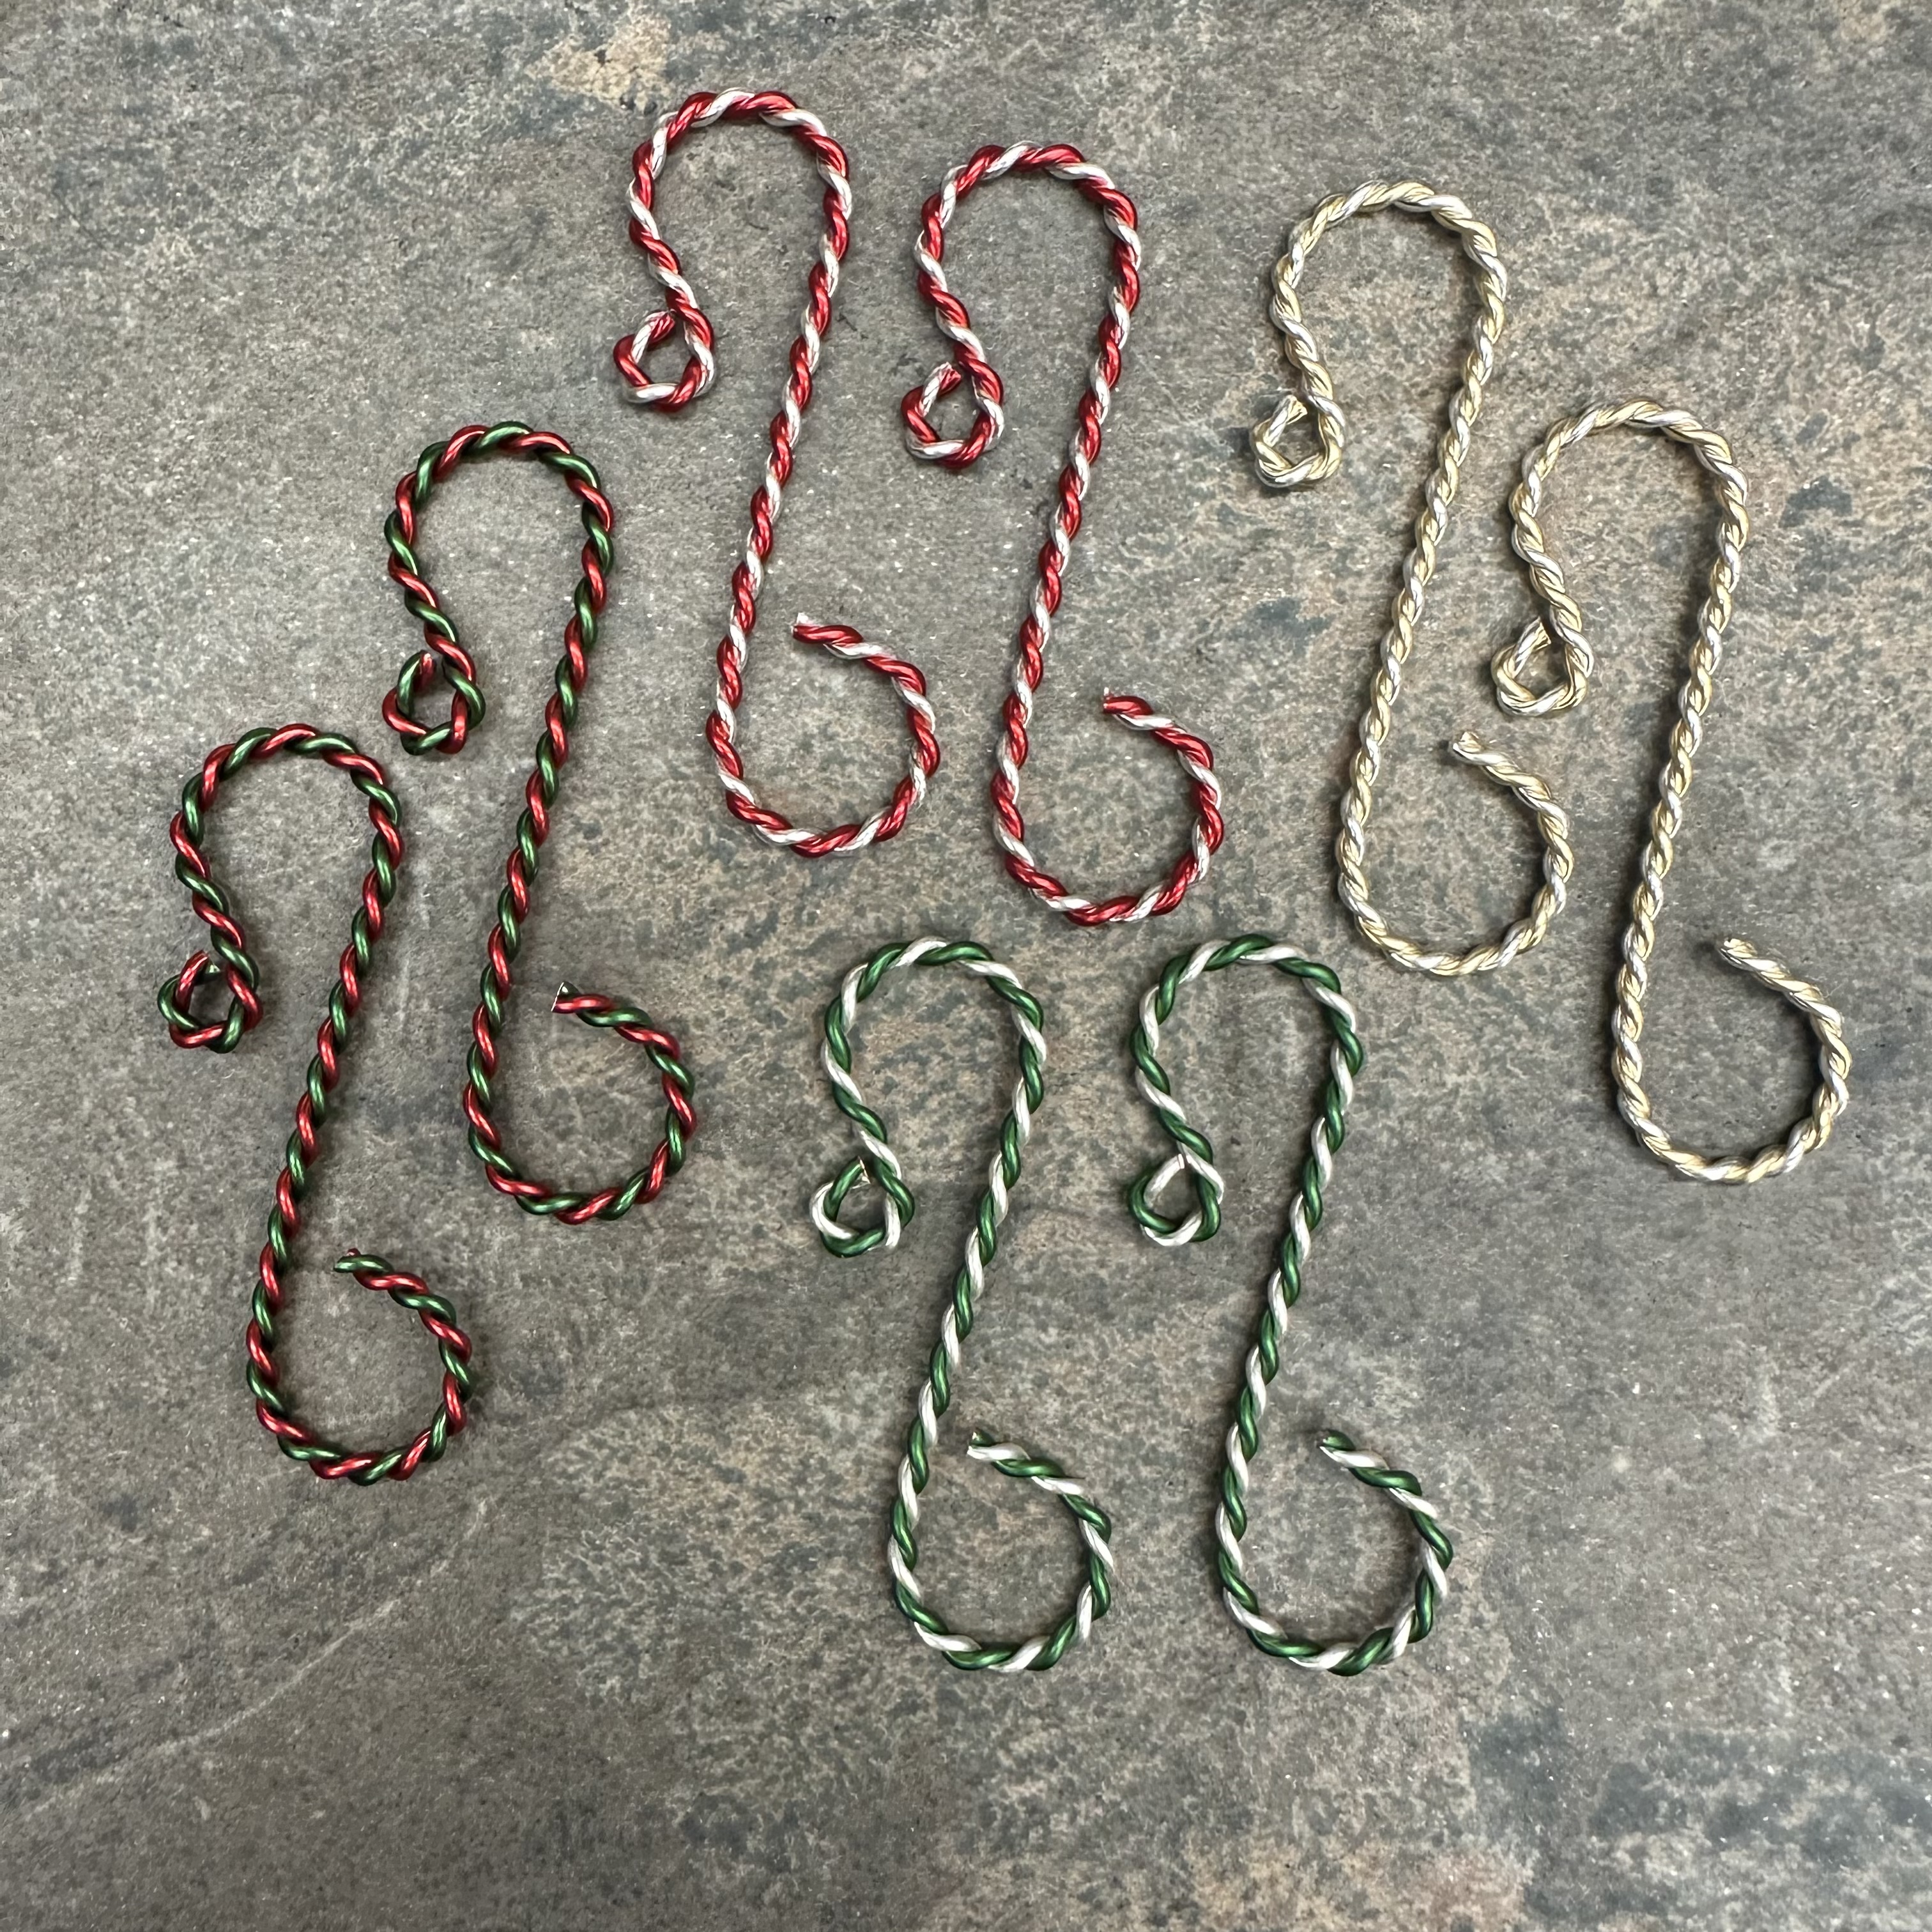 Twisted Ornament Hooks, 2, Set of 12. Choice of Red-Silver, Red-Green,  Green-Silver, or Silver/Gold